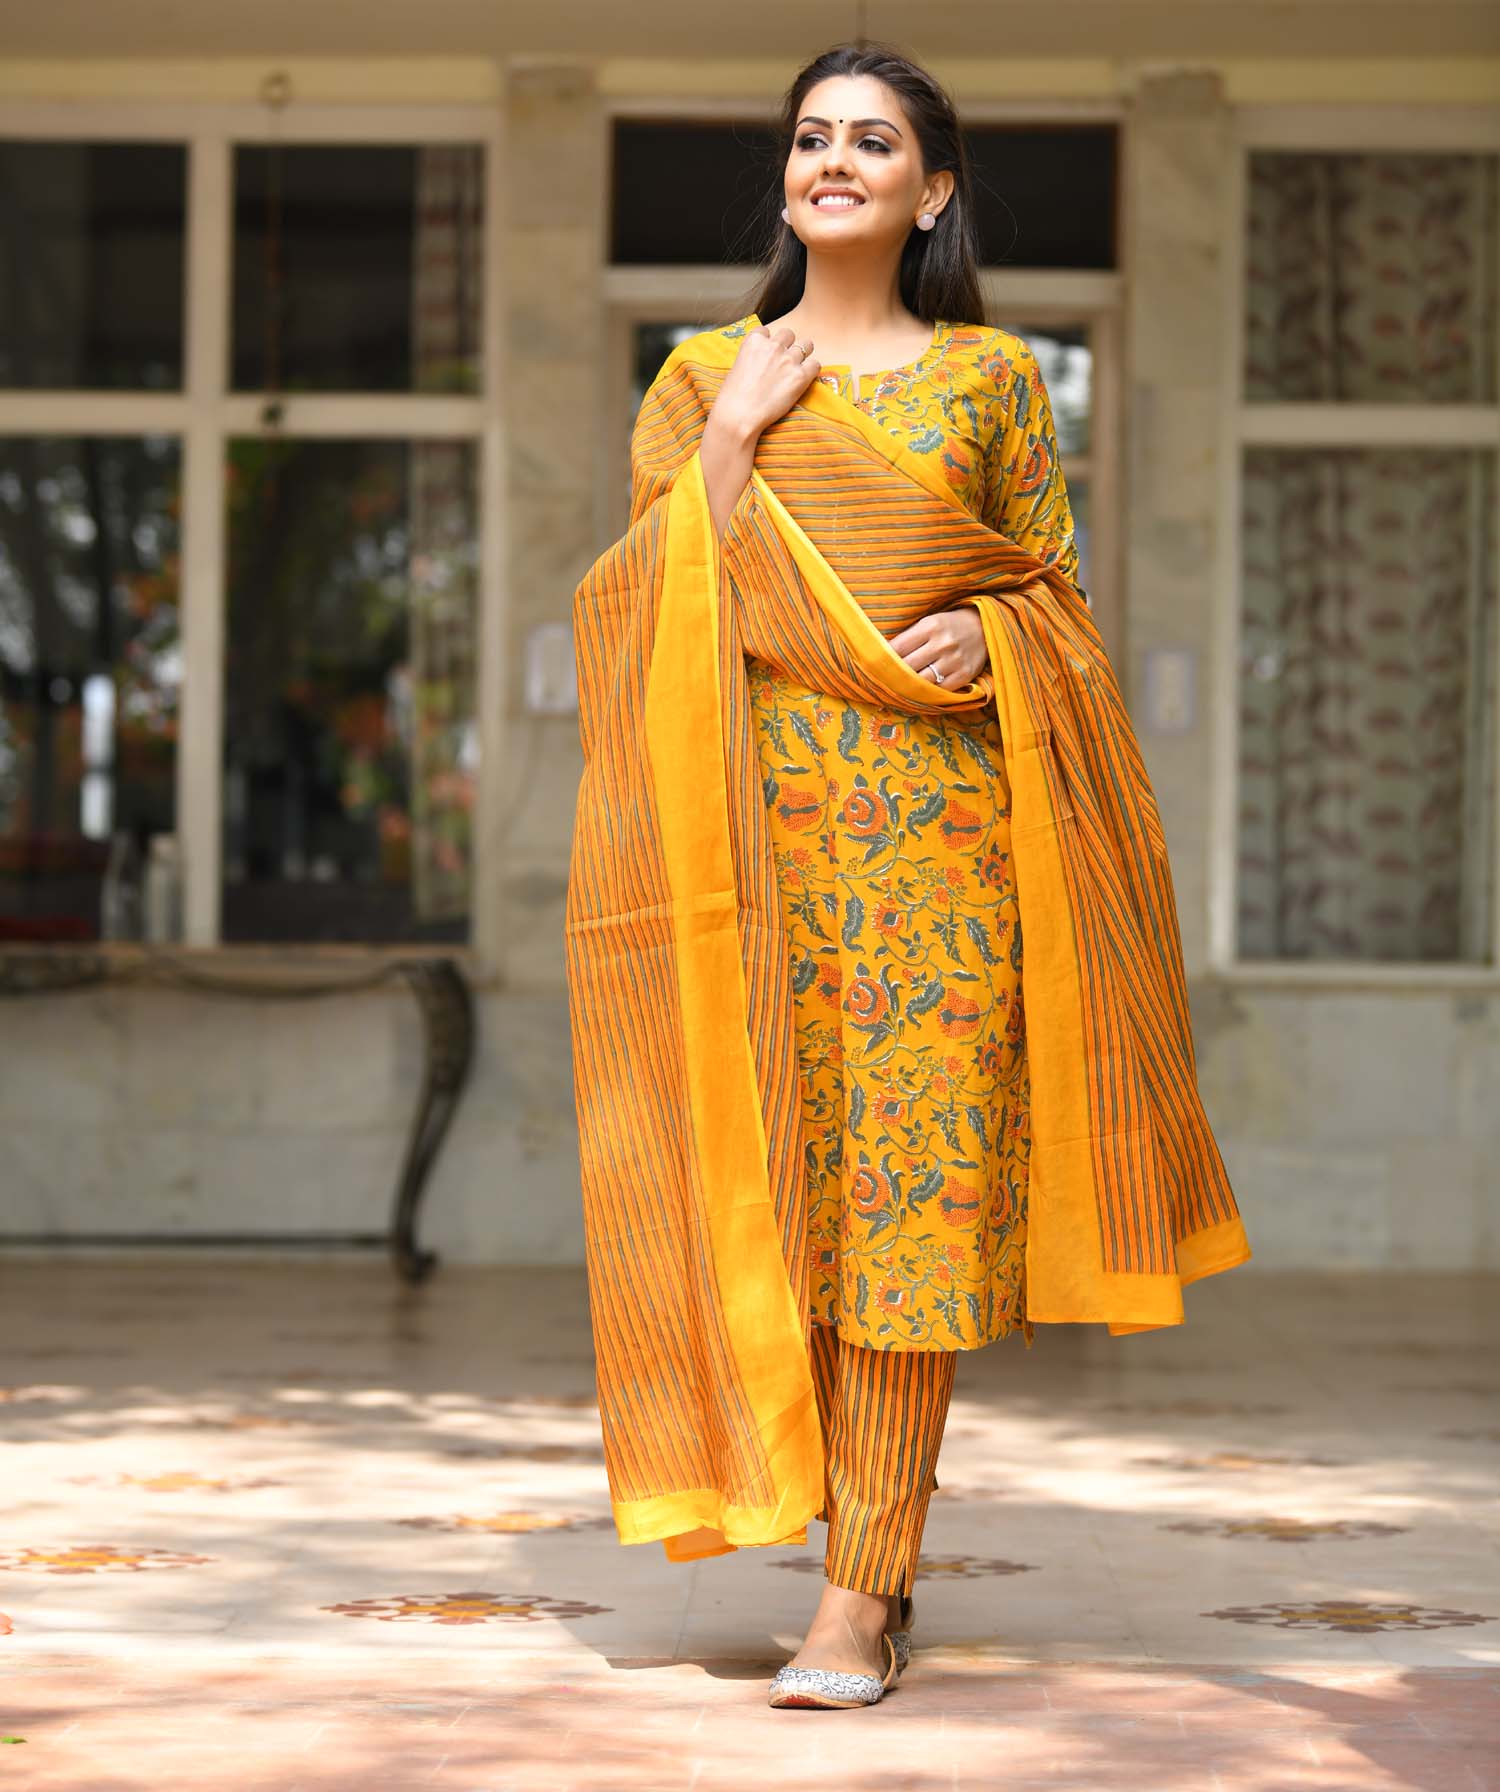 Shop Ethnic Suit Sets online at best prices from NUD!